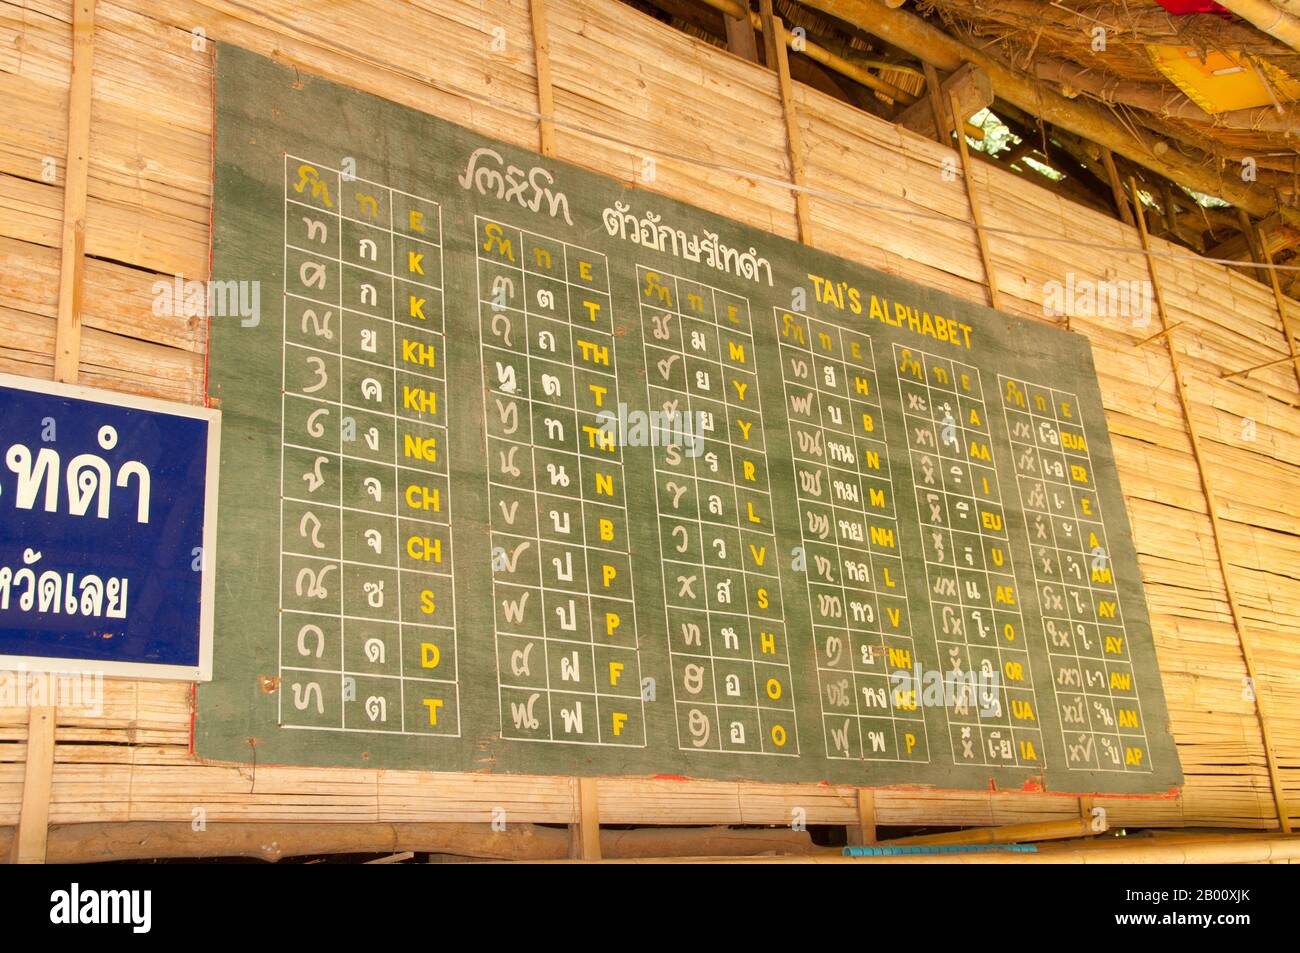 Thailand: The Tai Dam alphabet, Ban Na Pa Nat Tai Dam Cultural Village, Loei Province.  The Tai Dam or Black Tai are an ethnic group found in parts of Laos, Vietnam, China, and Thailand.  Tai Dam speakers in China are classified as part of the Dai nationality along with almost all the other Tai peoples. But in Vietnam they are given their own nationality (with the White Tai) where they are classified as the Thái nationality (meaning Tai people).  The Tai Dam originate from the vicinity of Dien Bien Phu in Vietnam. Stock Photo